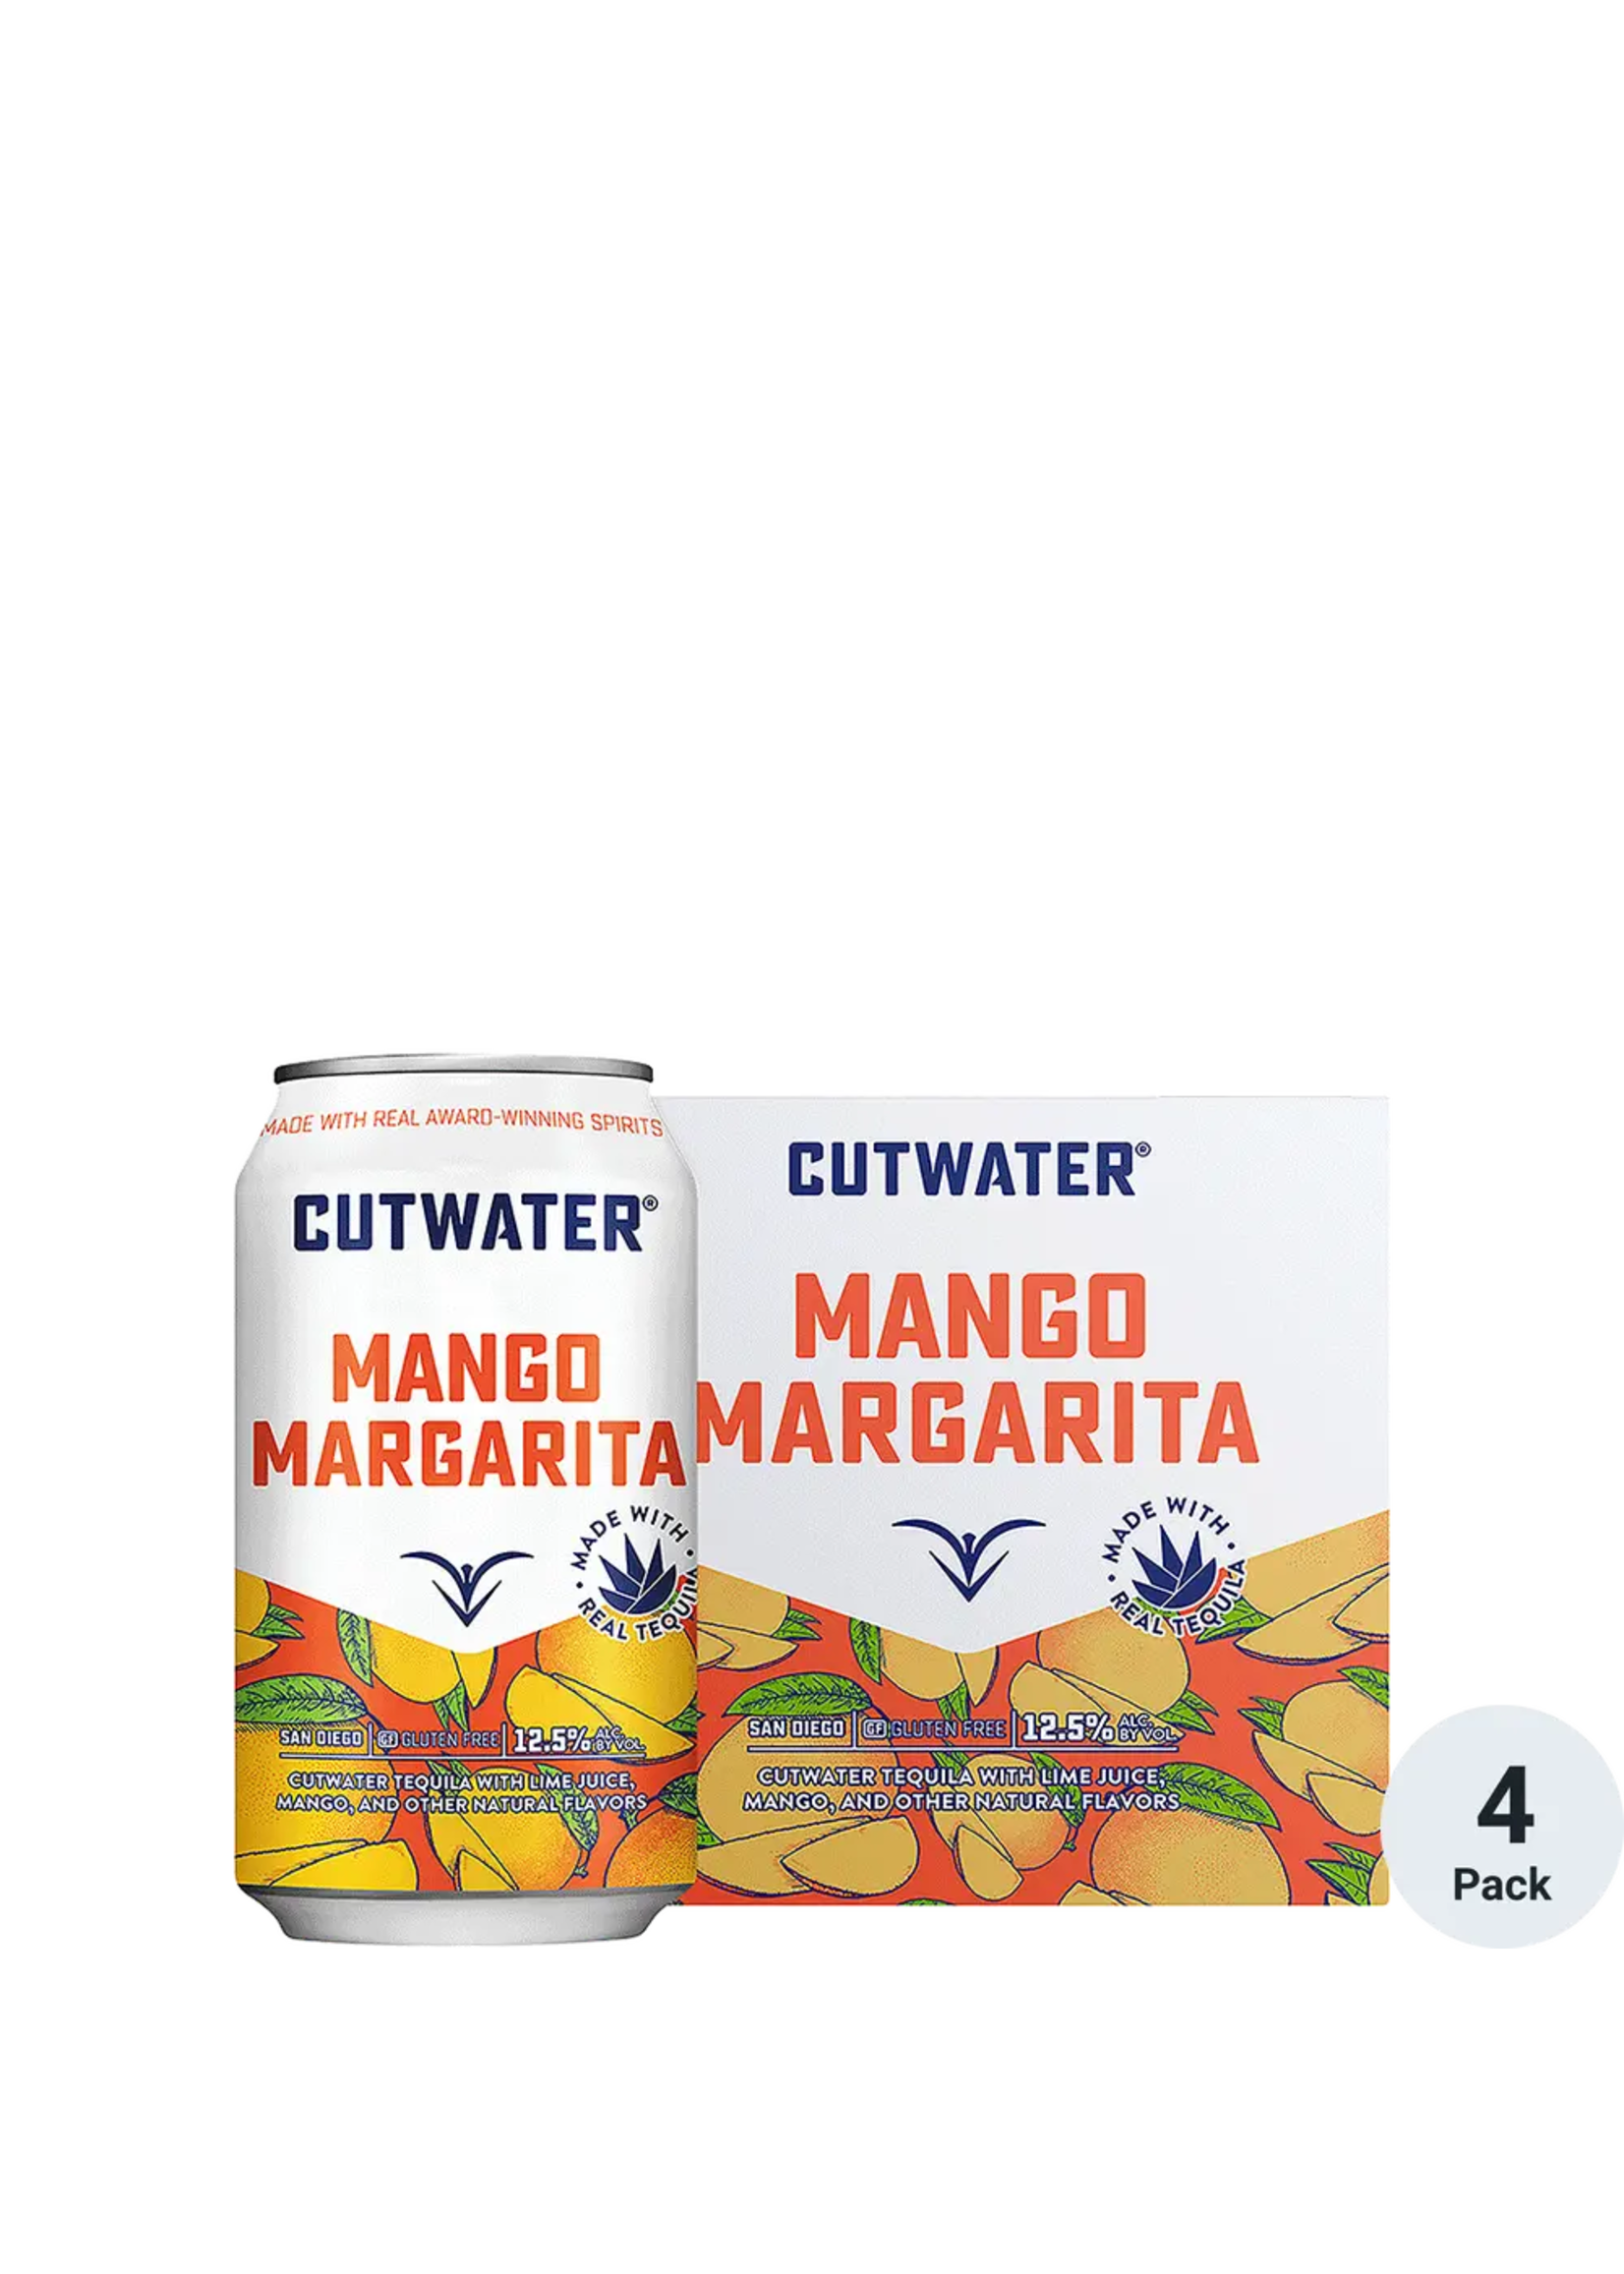 Cutwater Cocktail Mango Margarita 25Proof 4pk 12oz Cans